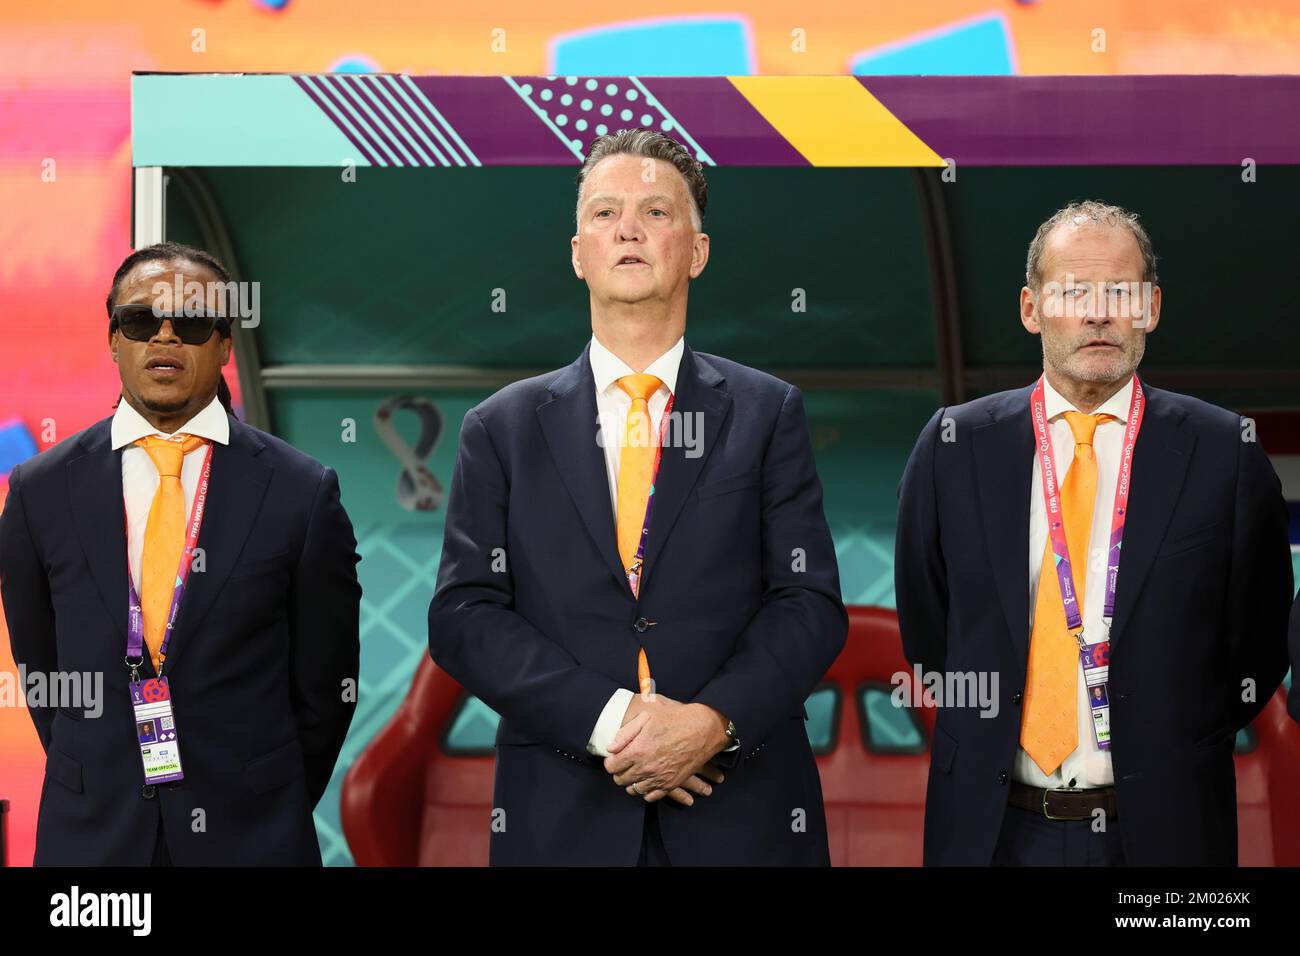 Doha, Qatar. 3rd Dec, 2022. Netherlands head coach Louis van Gaal (C) and assistant coach Edgar Davids (L) and Danny Blind are seen before the Round of 16 match between the Netherlands and the United States at the 2022 FIFA World Cup at Khalifa International Stadium in Doha, Qatar, Dec. 3, 2022. Credit: Lan Hongguang/Xinhua/Alamy Live News Stock Photo